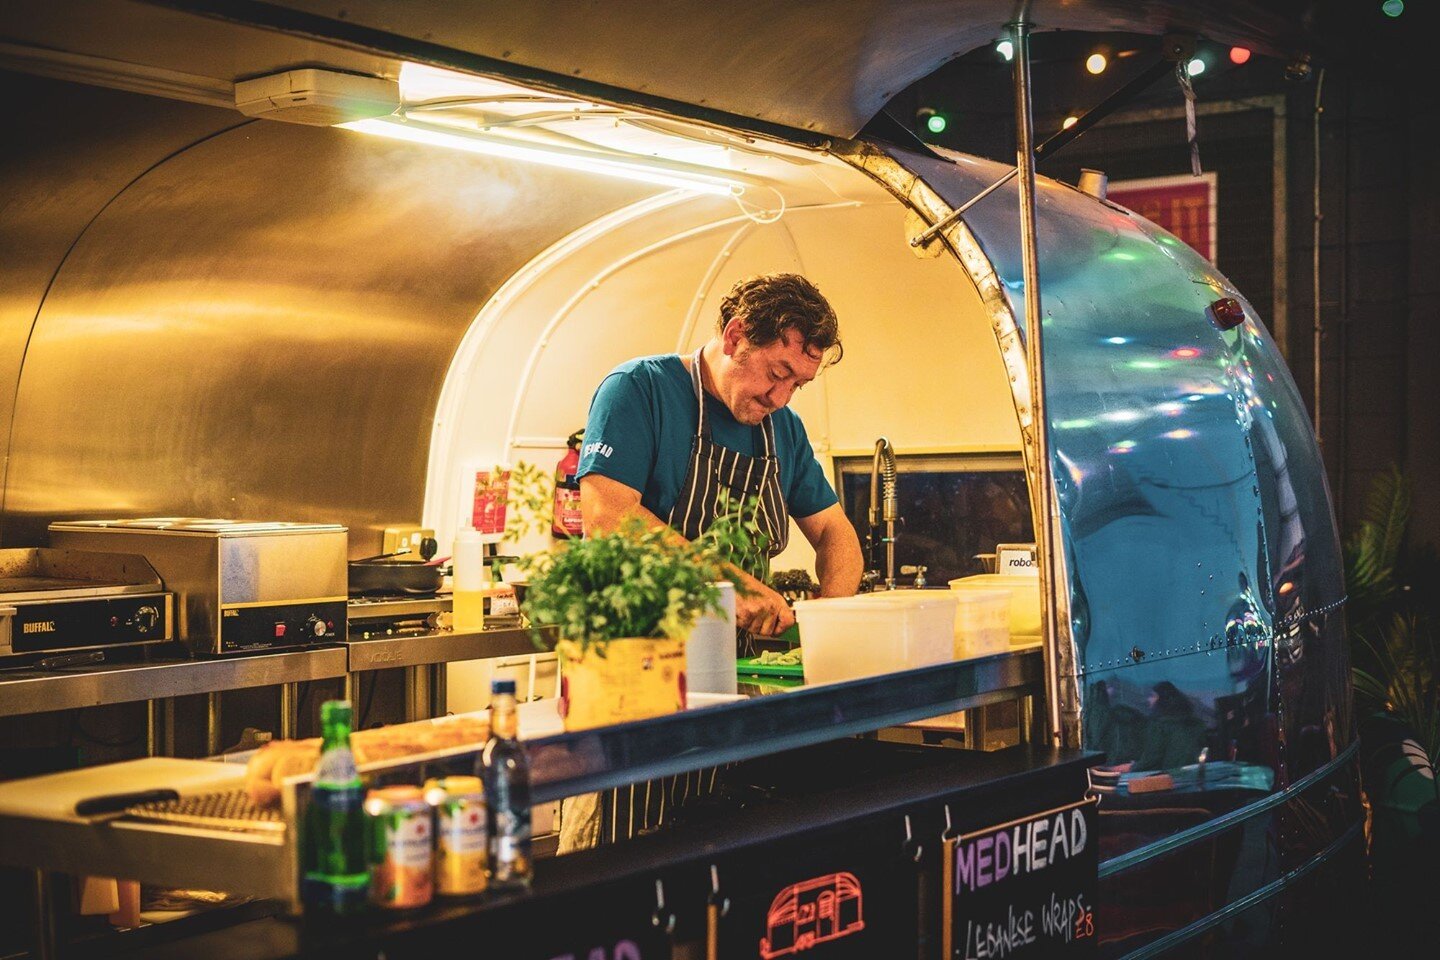 They&rsquo;re always a miss. The Medhead guys are back in The Loading Bay from 10am this morning. They&rsquo;ll be whipping up their cracking breakfast dishes while you sip on your fresh Jungle Coffee. Thursday vibes👌⠀
⠀
⠀
⠀
#theloadingbay #theloadi